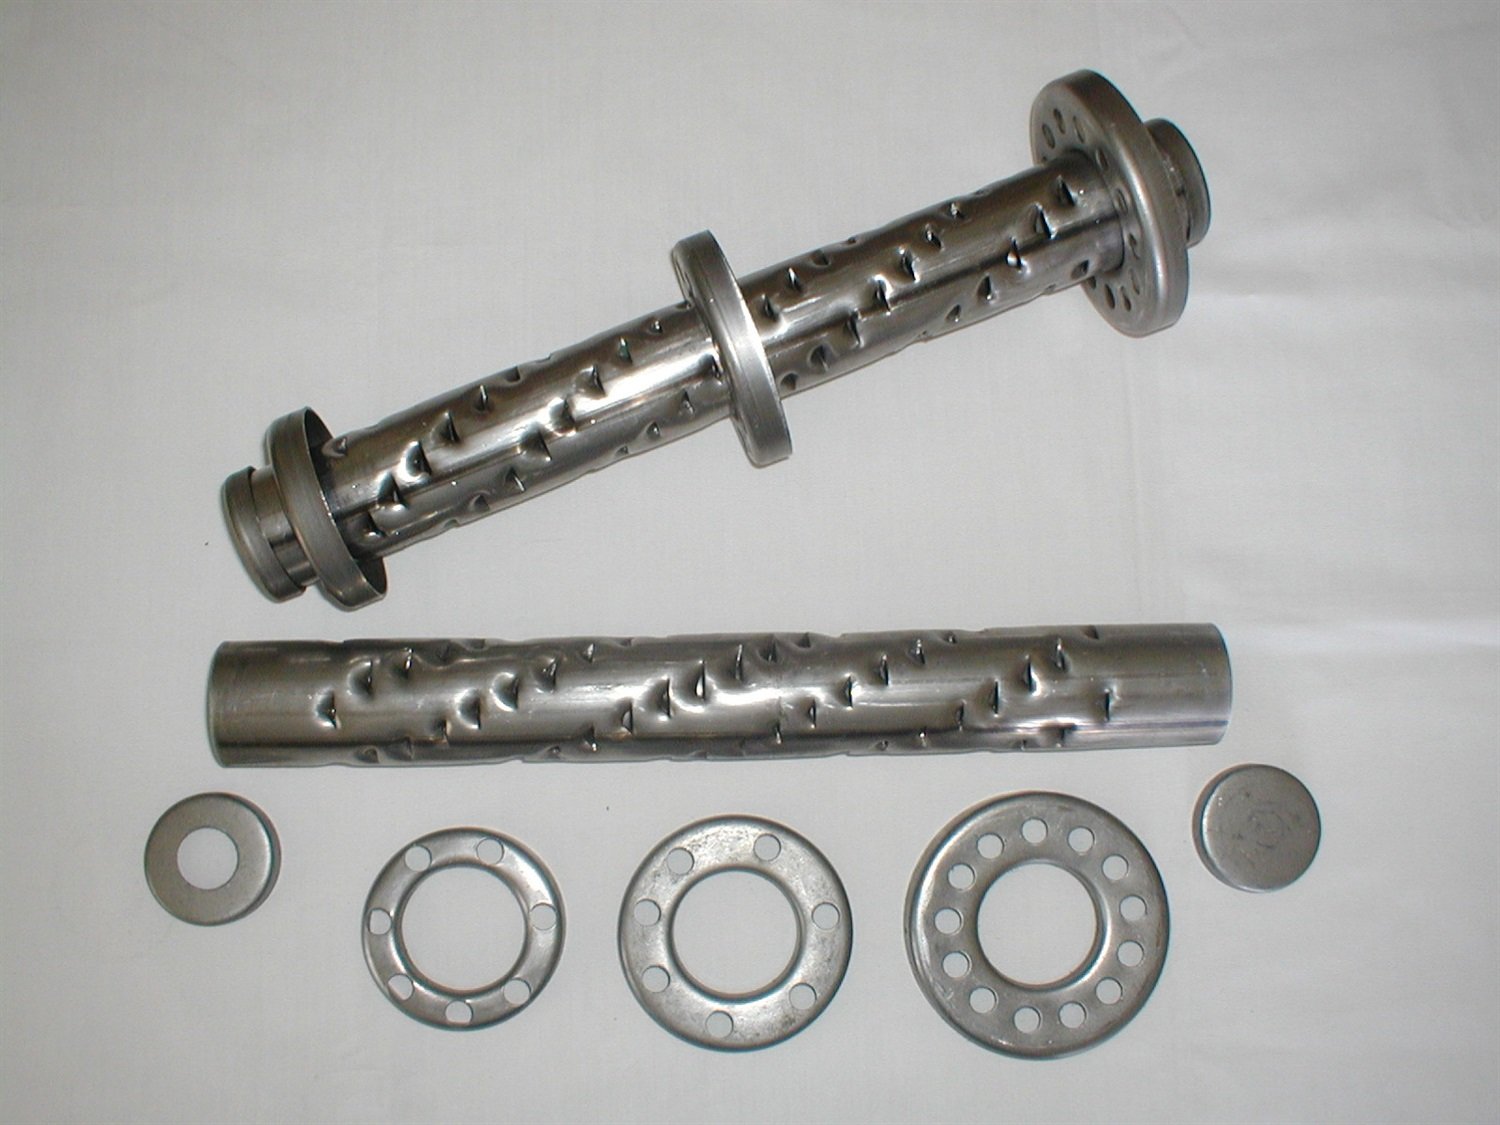 Lake Style Header Muffler Kit w/Round Flange Incl. 3 in./3.5 in./3.5 in. Disks/Central Tube/Plug/Restrictor Requires Welding